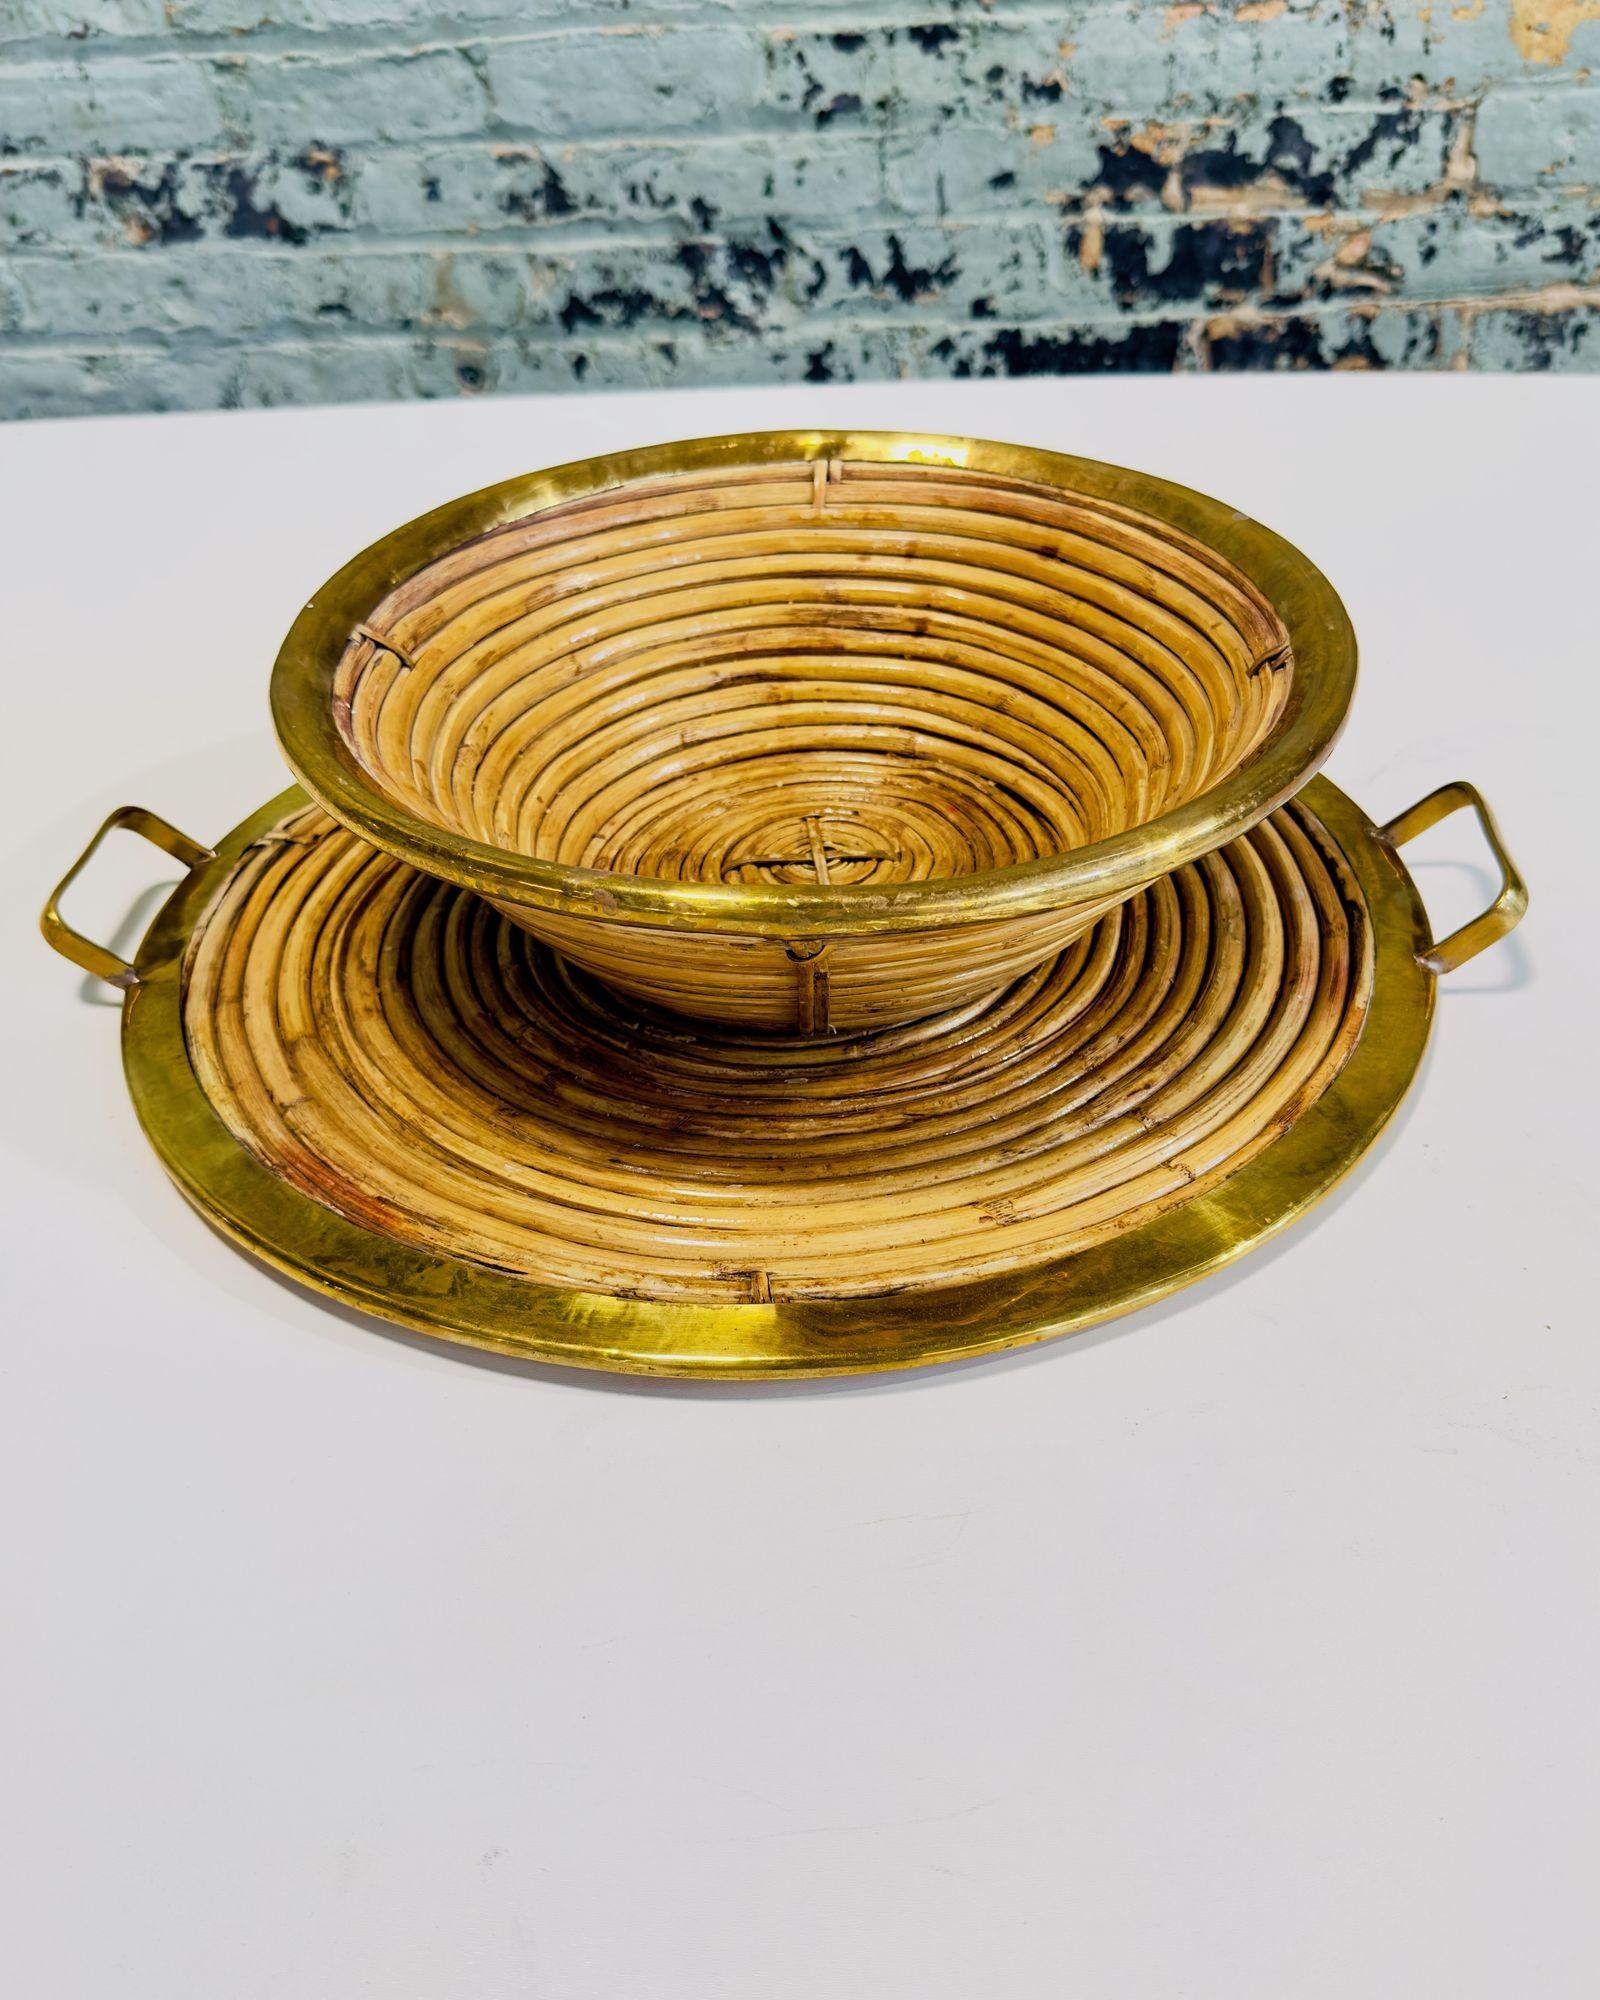 Rattan and Brass Tray and Bowl, Style of Gabriella Crespi, Italy 1970.
Amazing rattan brass tray and bowl with brass trim and handles on the tray. Made of weaved, woven rattan, wicker, bamboo and brass rims and handles.